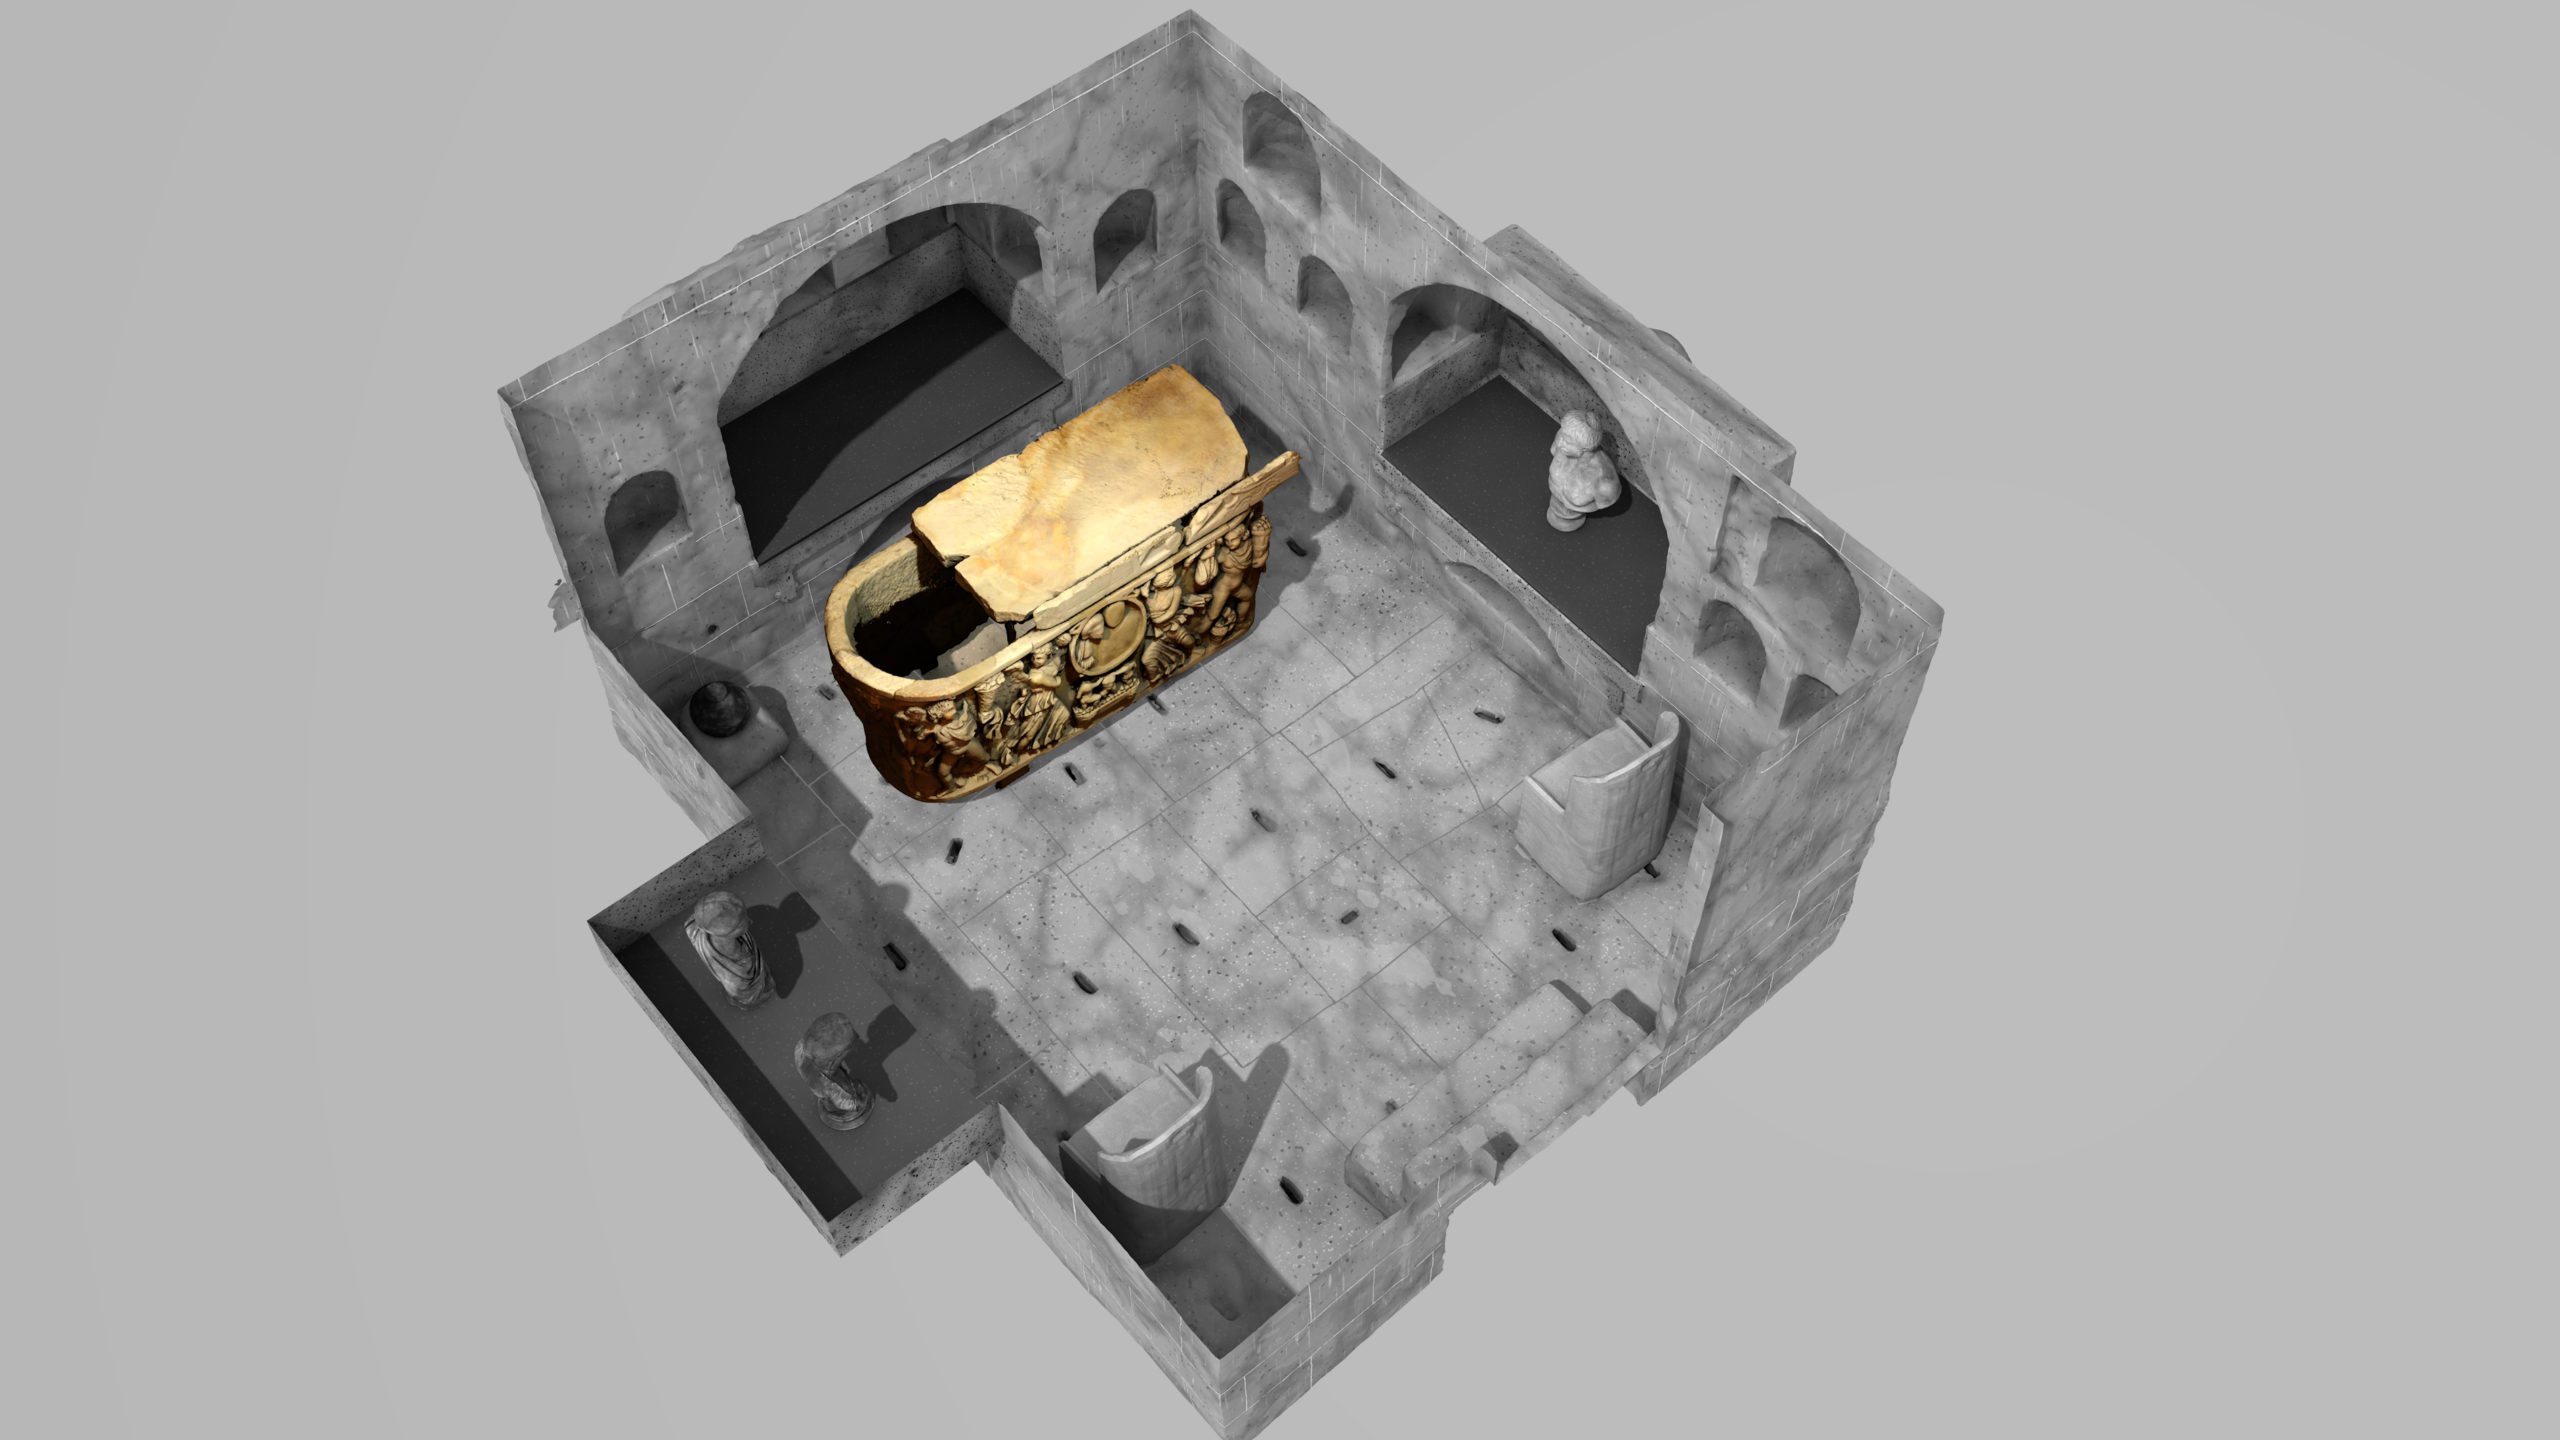 A 3D rendering of the burial chamber in Cologne-Weiden